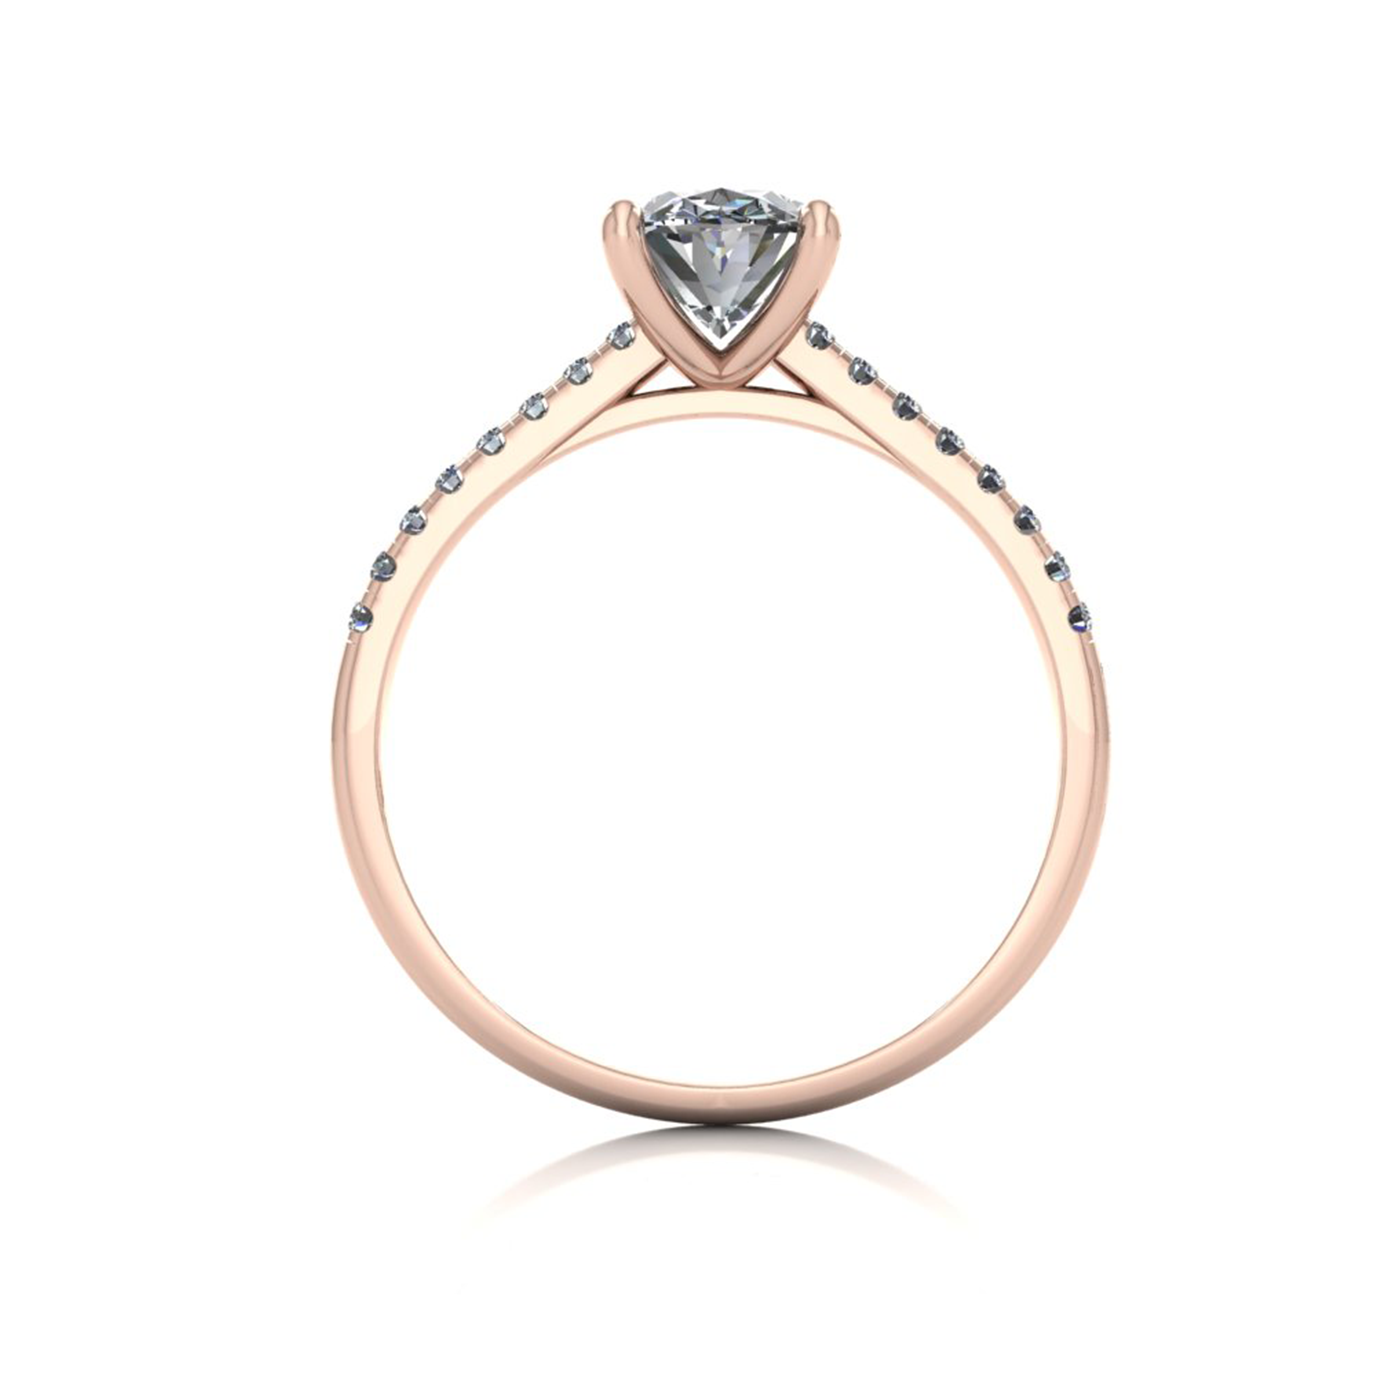 18K ROSE GOLD 4 PRONGS OVAL CUT DIAMOND ENGAGEMENT RING WITH WHISPER THIN PAVÉ SET BAND